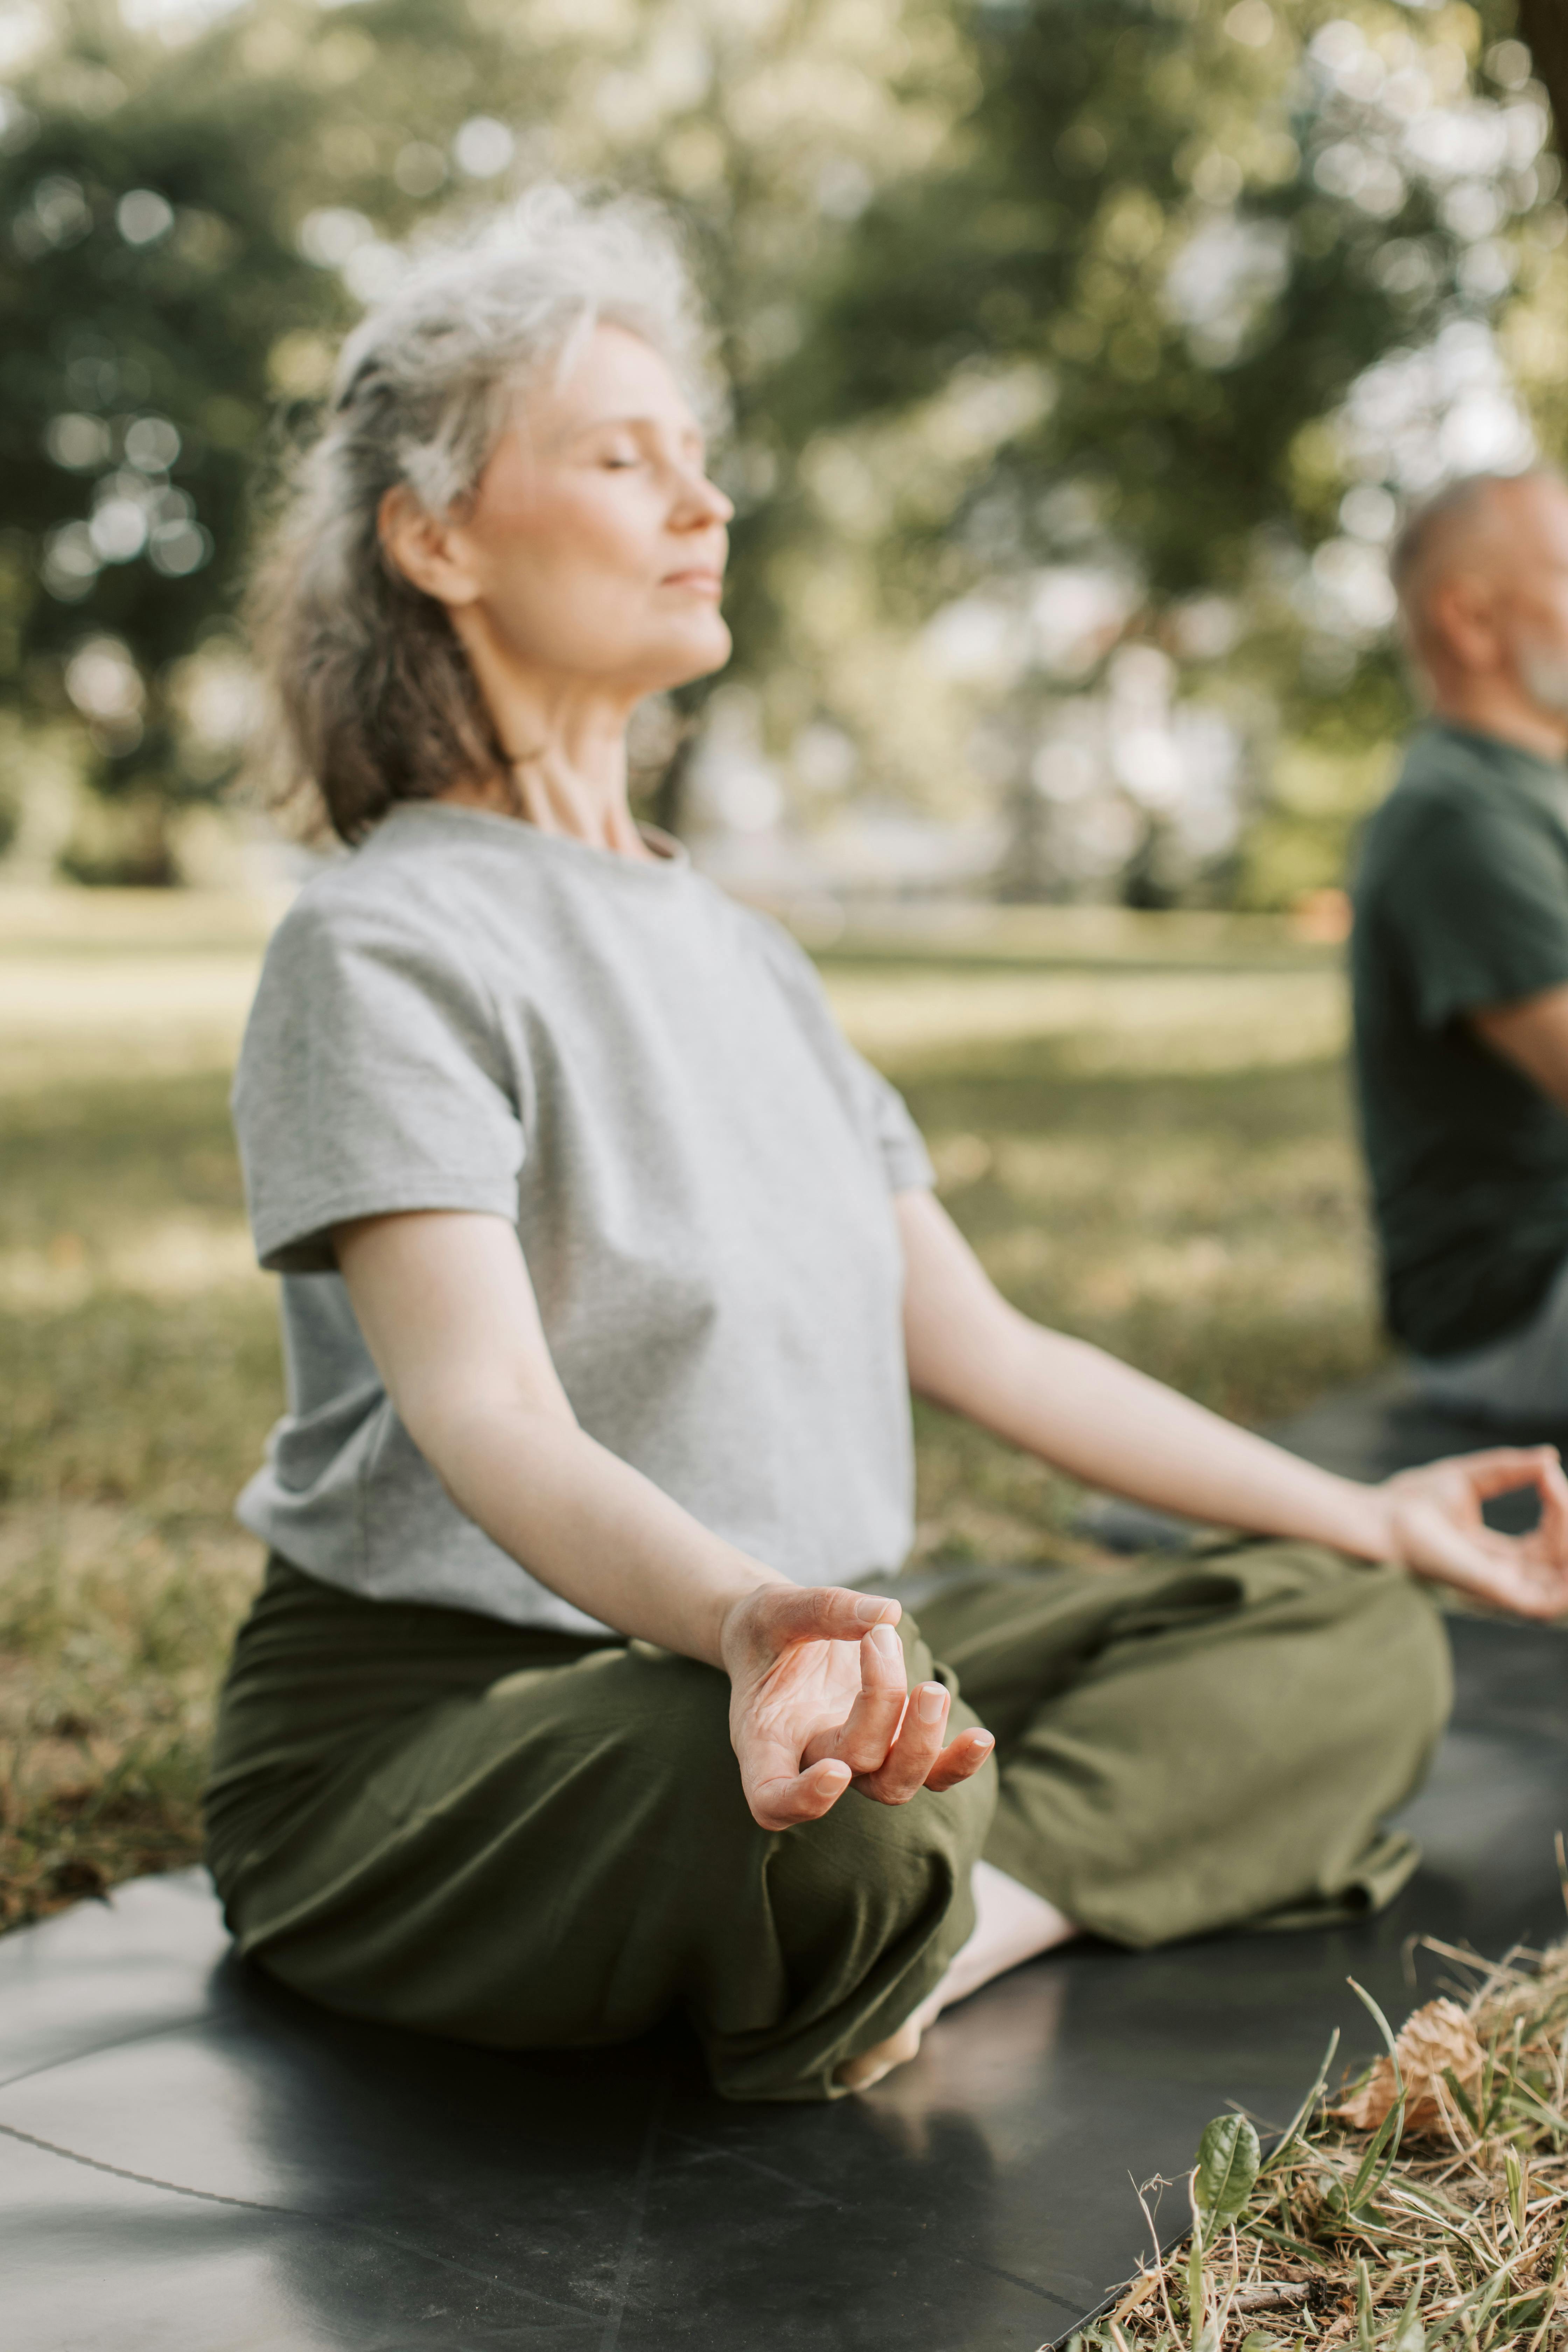 middle-aged woman doing yoga - Stock Image - F003/8654 - Science